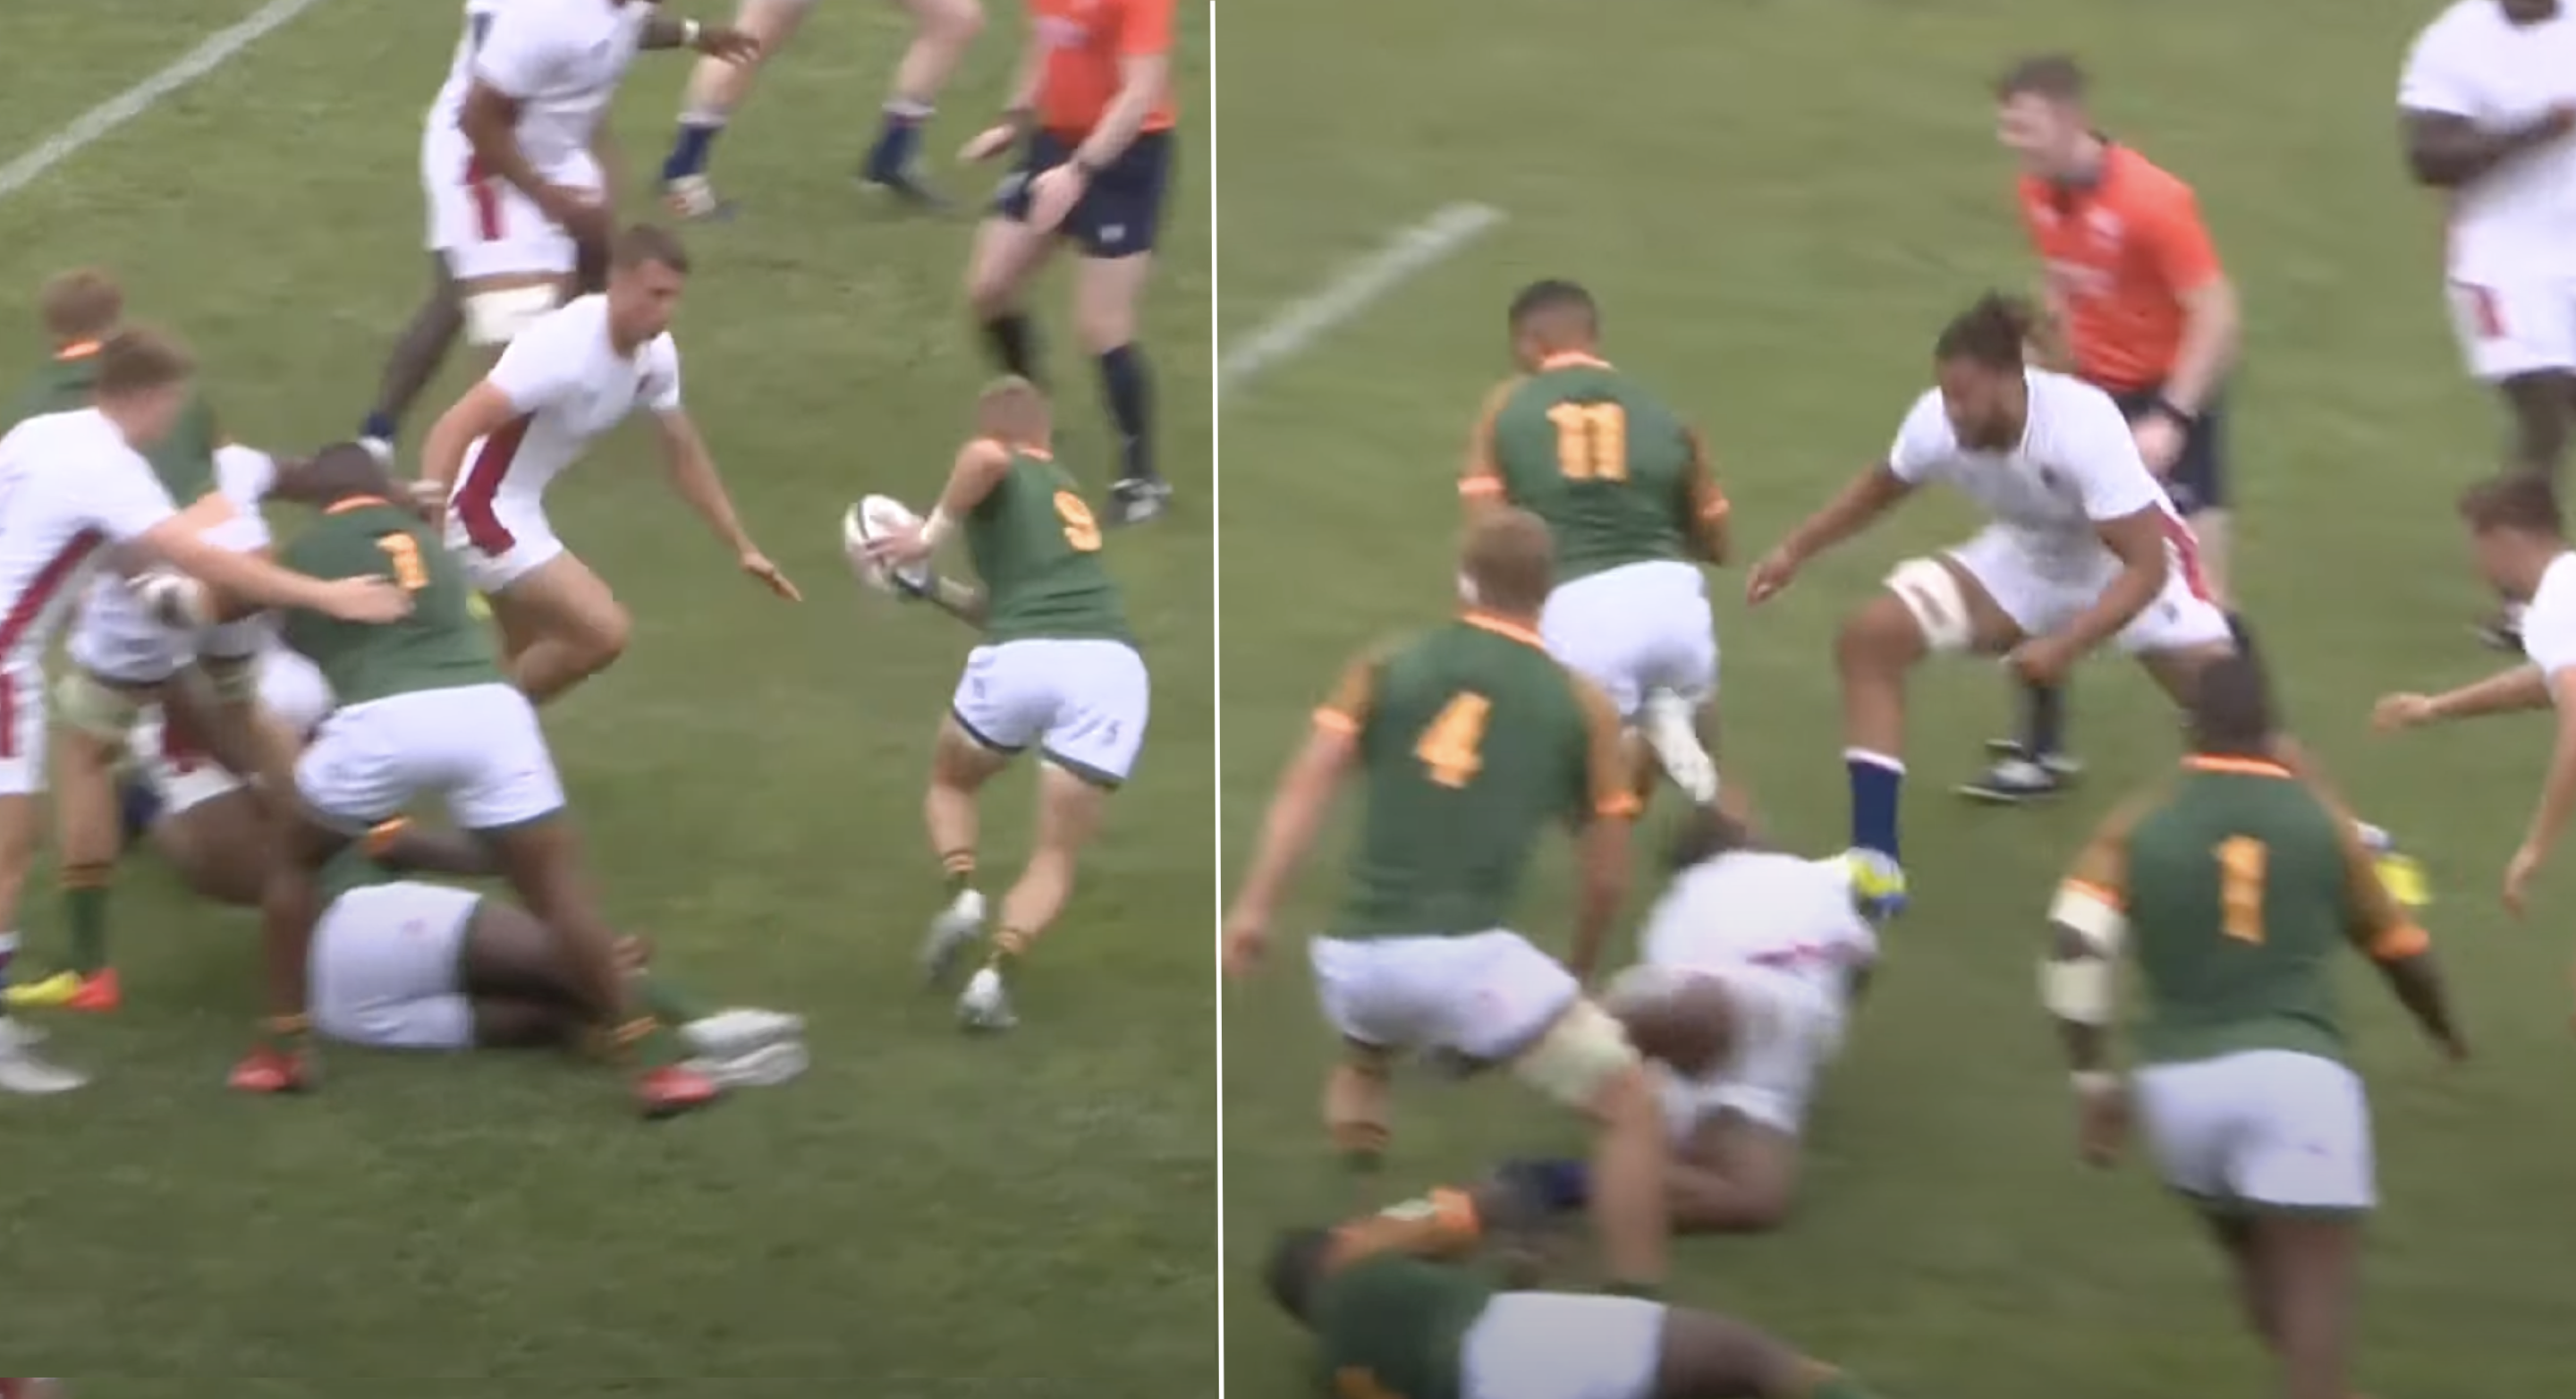 Junior Bok humiliates England with absurd miracle pass